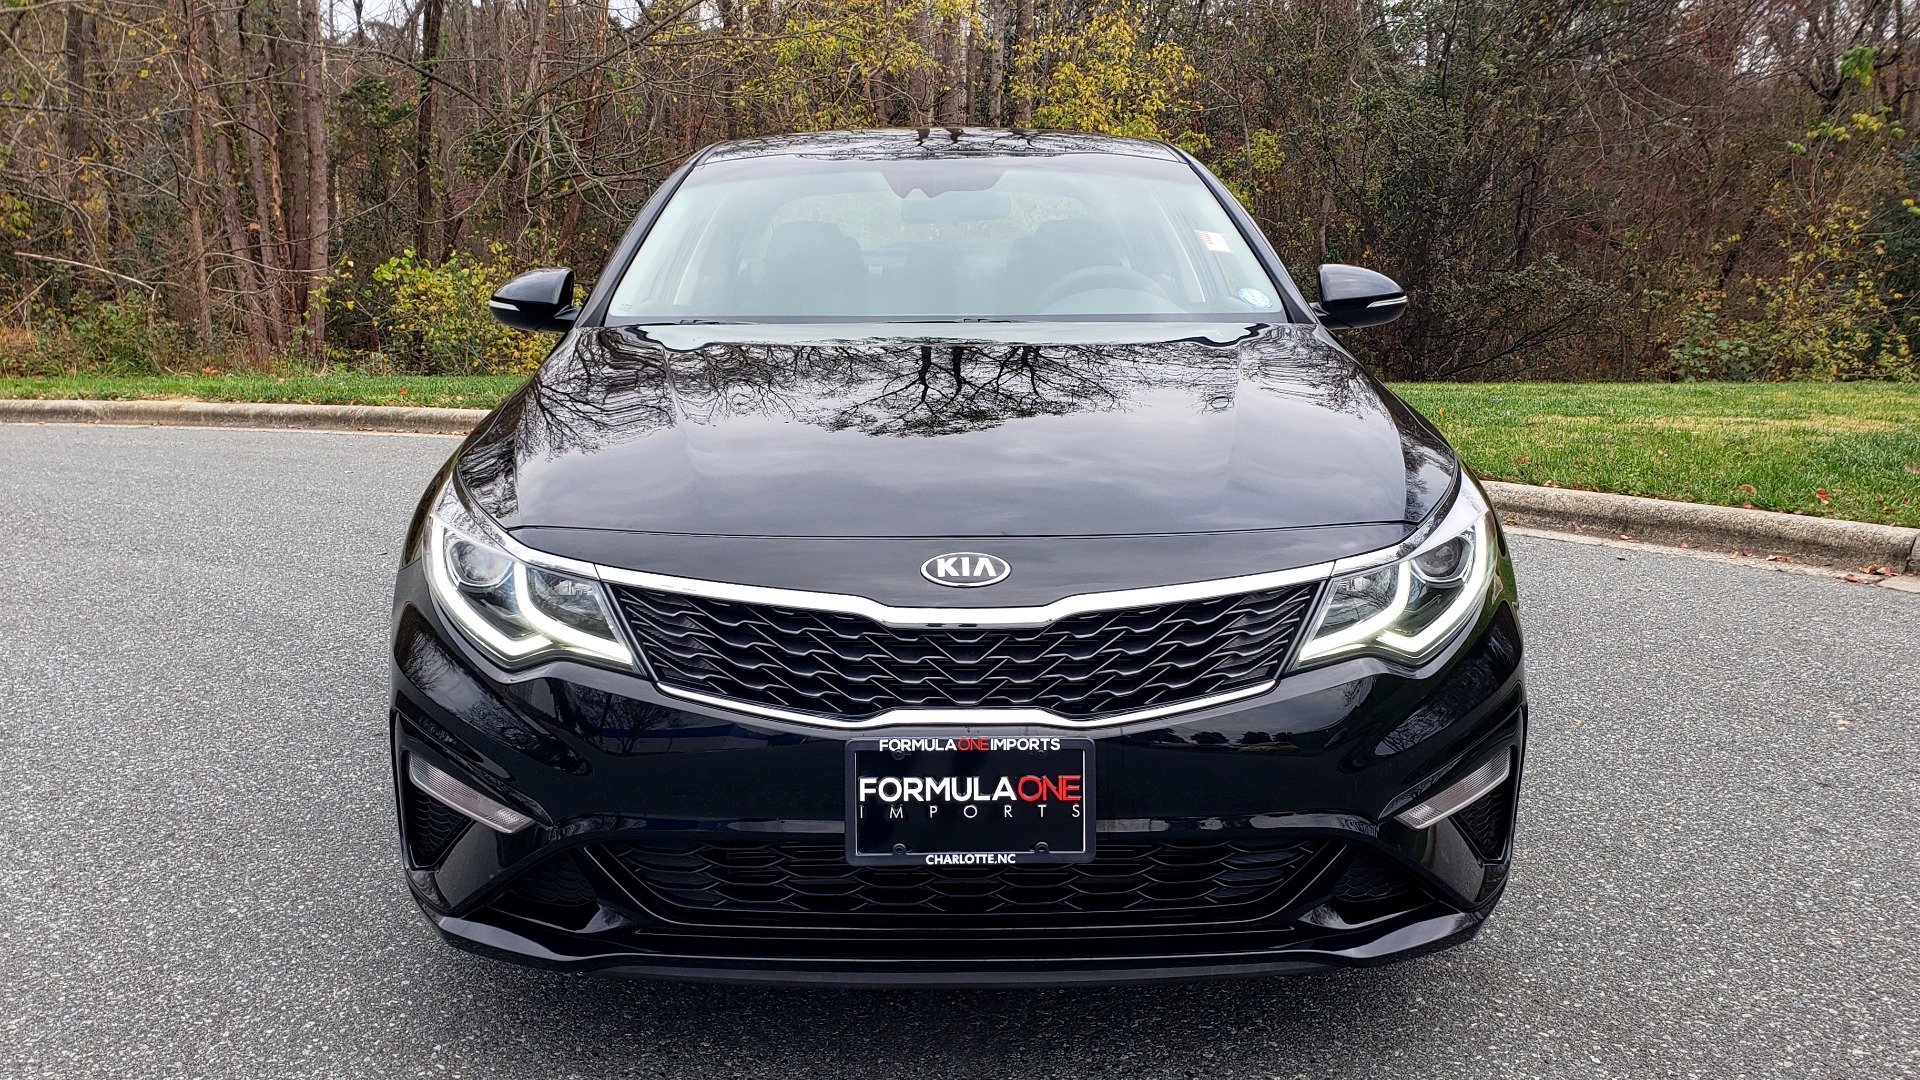 Used 2019 Kia OPTIMA LX AUTO / 2.4L 4-CYL / 6-SPD AUTO / REARVIEW / LOW MILES for sale Sold at Formula Imports in Charlotte NC 28227 16